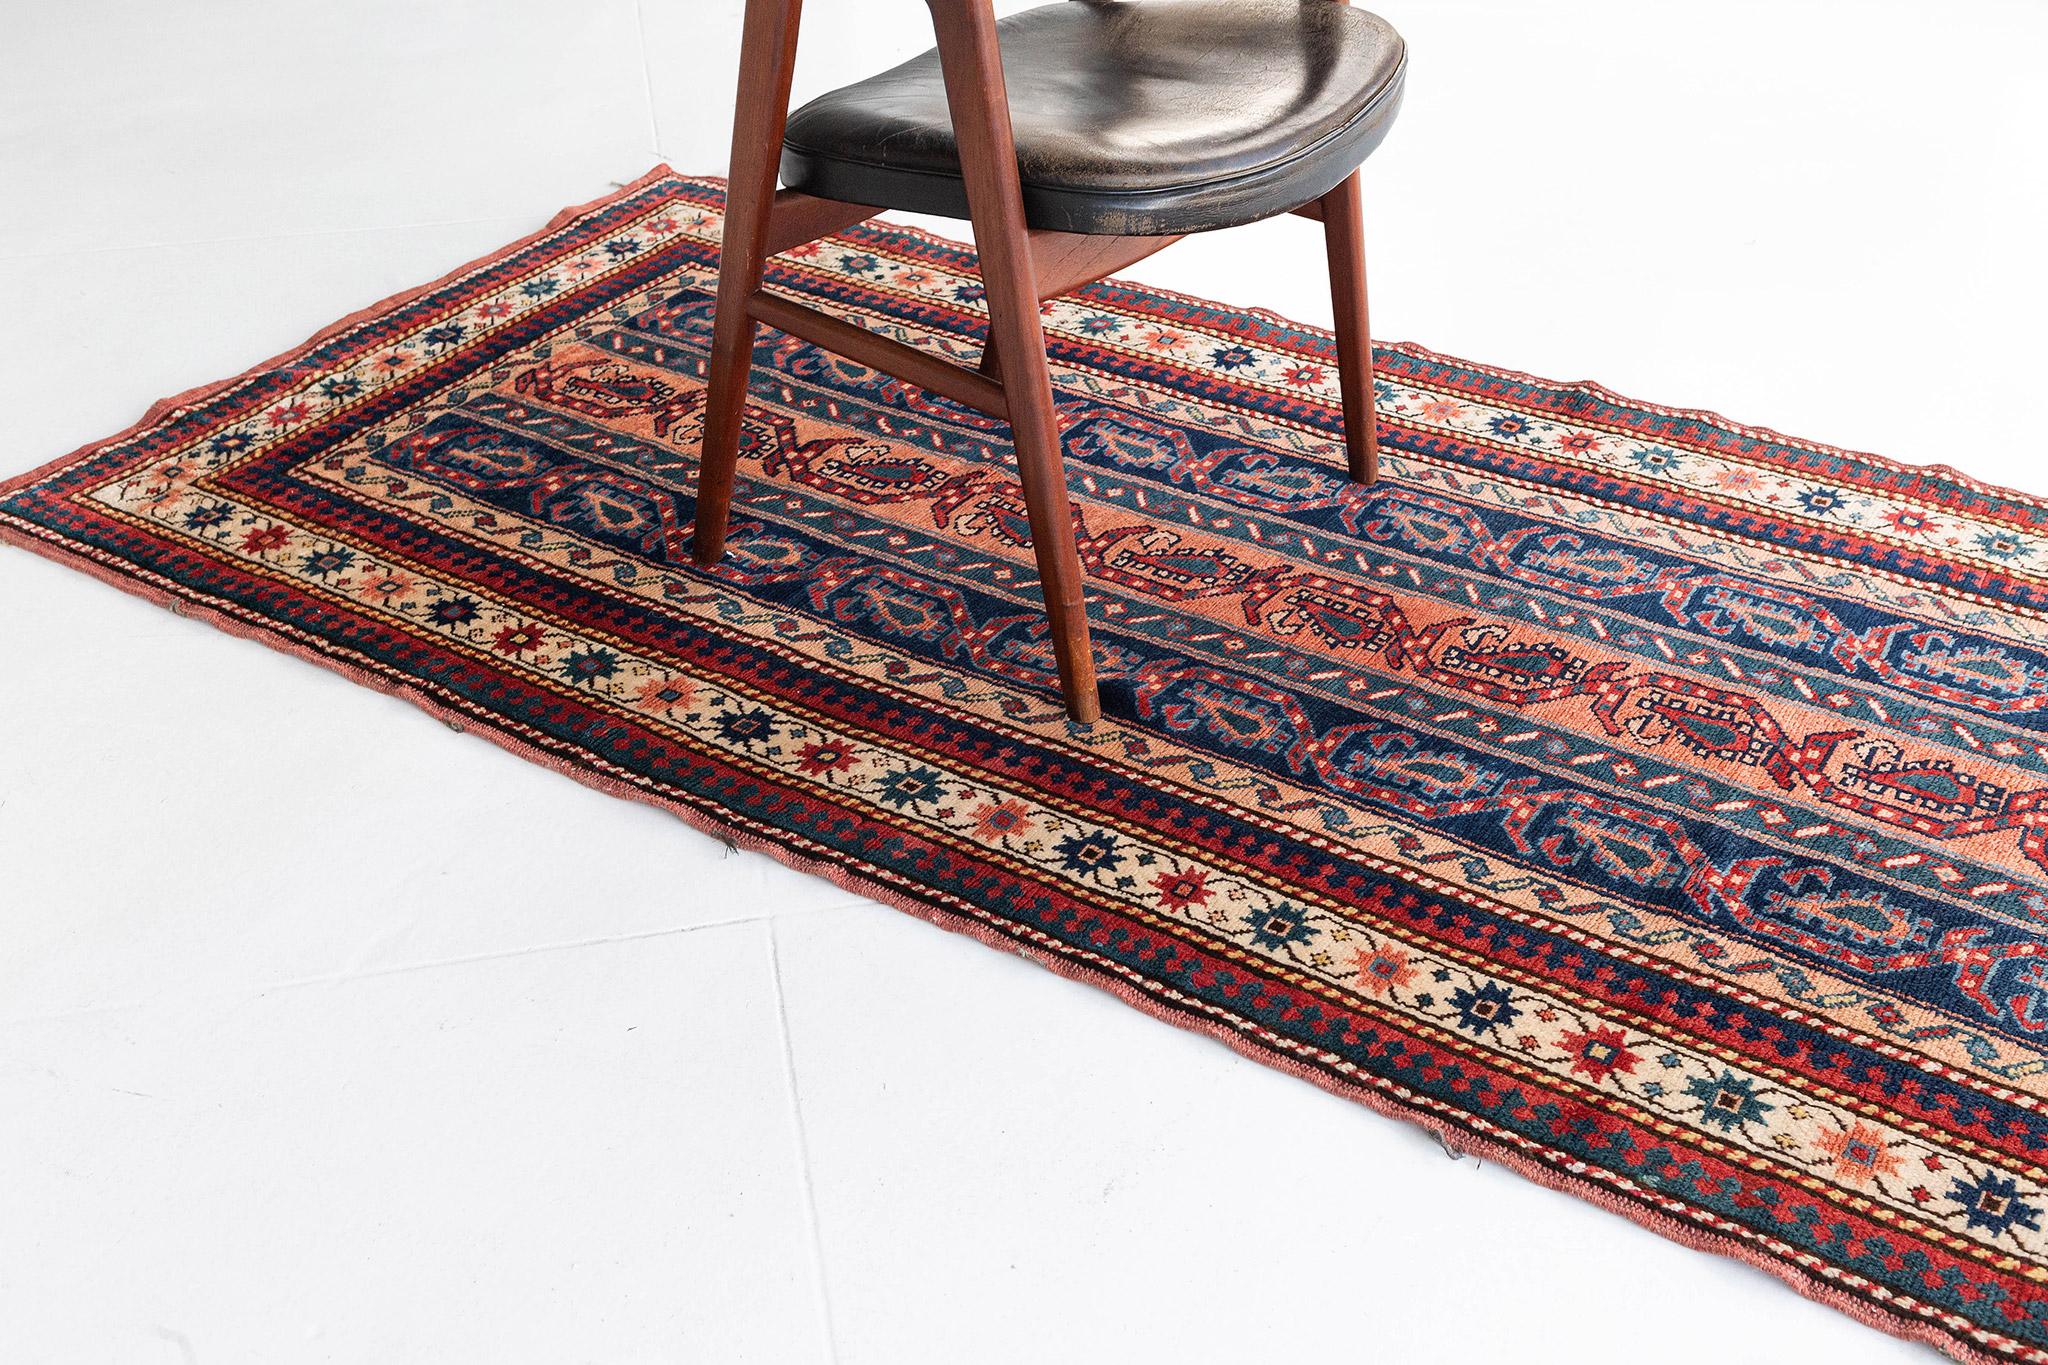 Behold and catch a glimpse of the elegance of the Caucasian Kazak rug from our sought-after collection. Tones of indigo, maroon, and cream featured the alternates and outline details of Caucasian symbols. Furniture that having a boho-chic and even